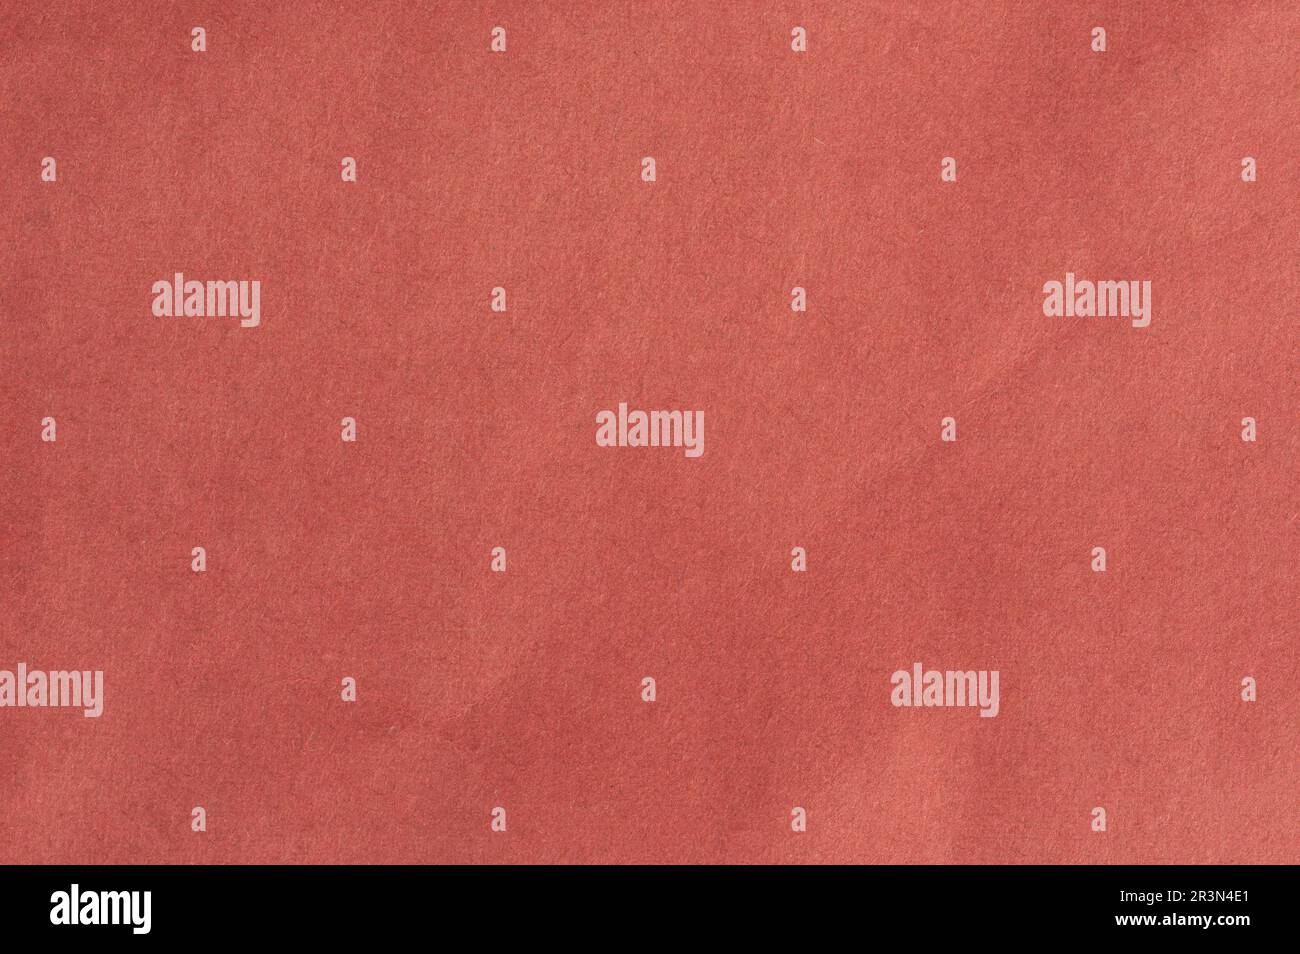 Empty clean pink color paper texture background macro close up view Stock Photo